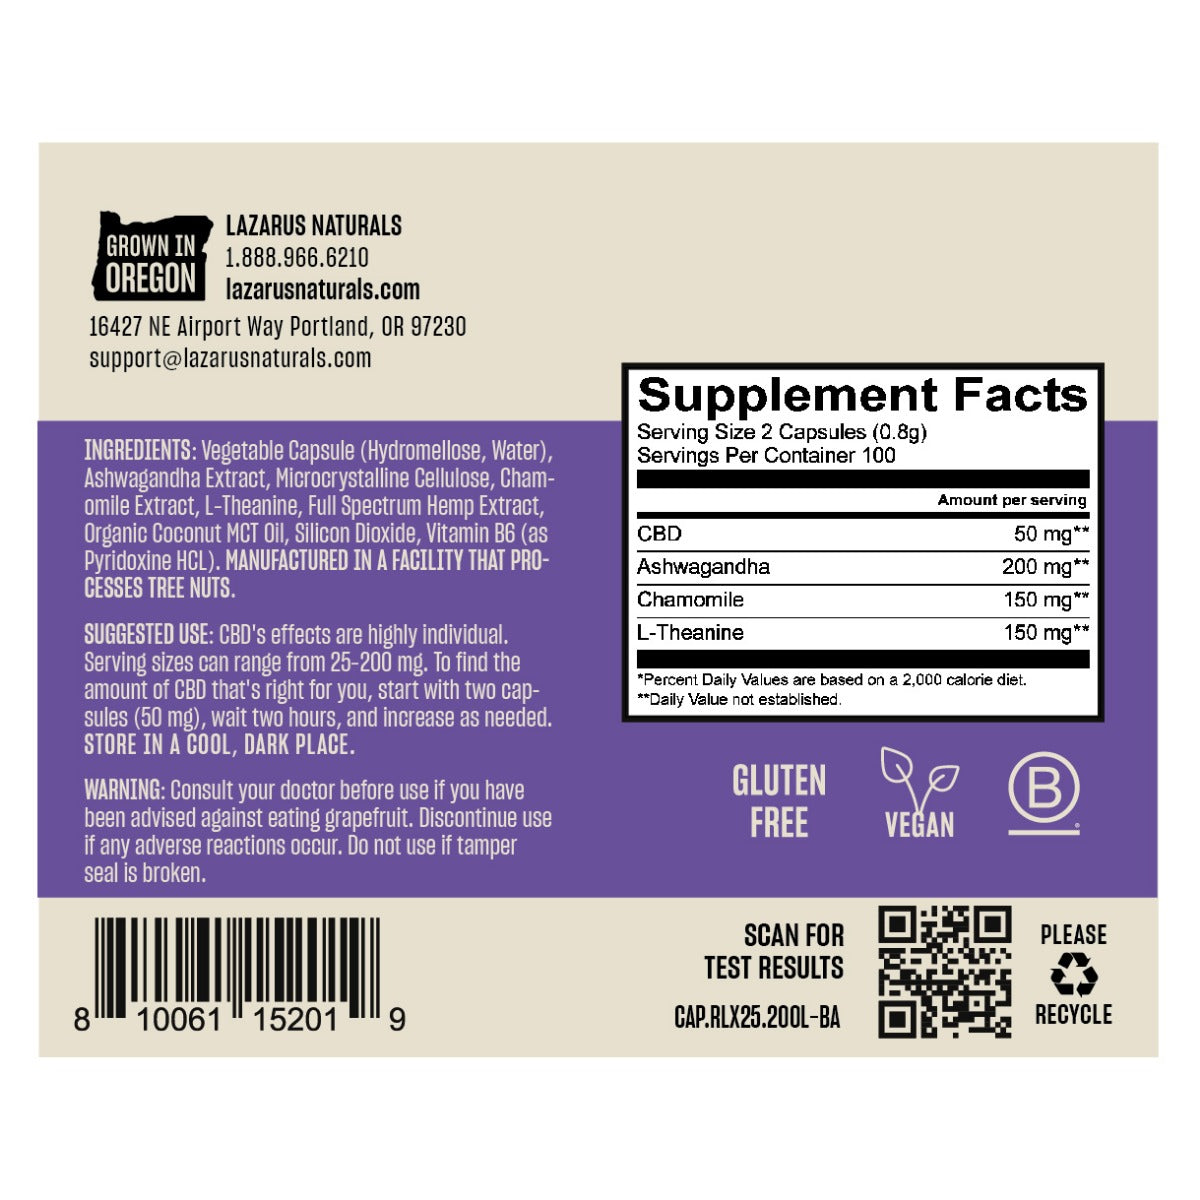 
                  
                    Lazarus Naturals Relax CBD Capsule product information with ingredients, usage, and contact details.
                  
                